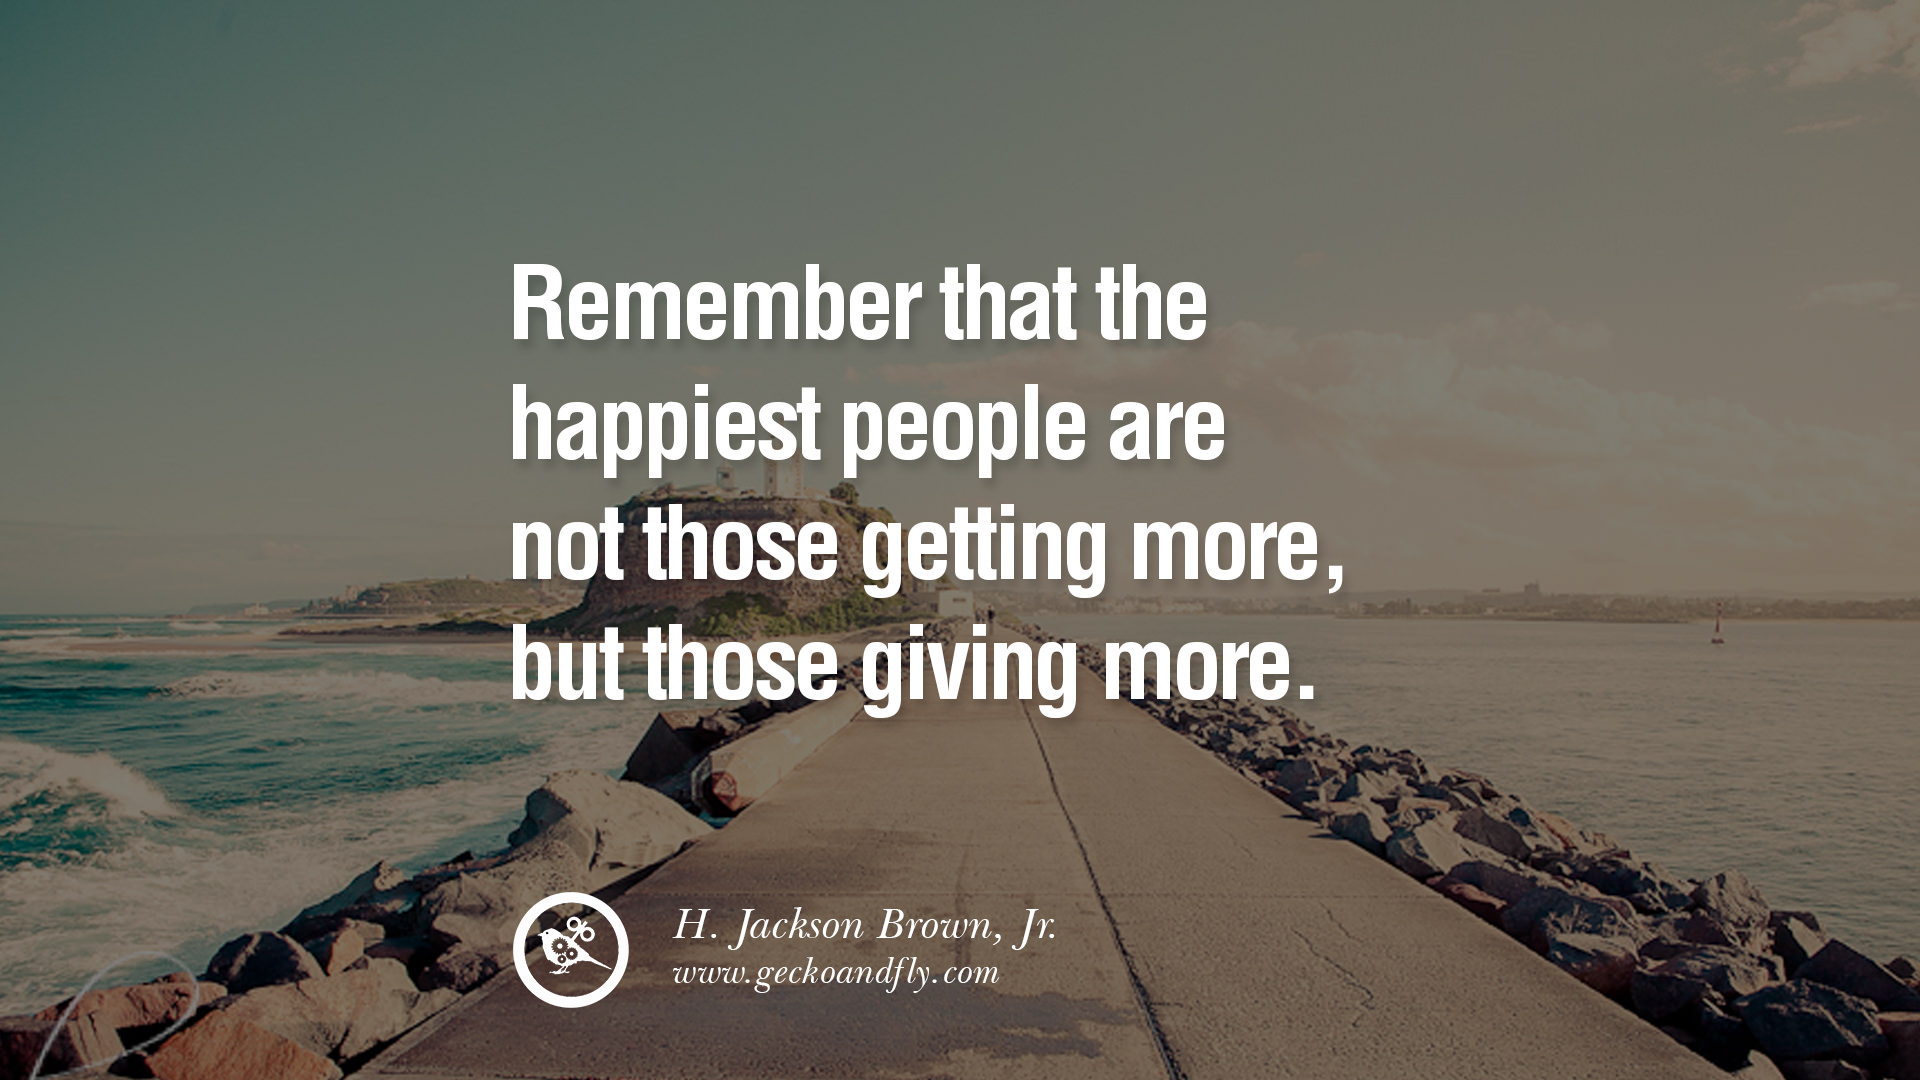 Quotes About Pursuing Happiness. QuotesGram